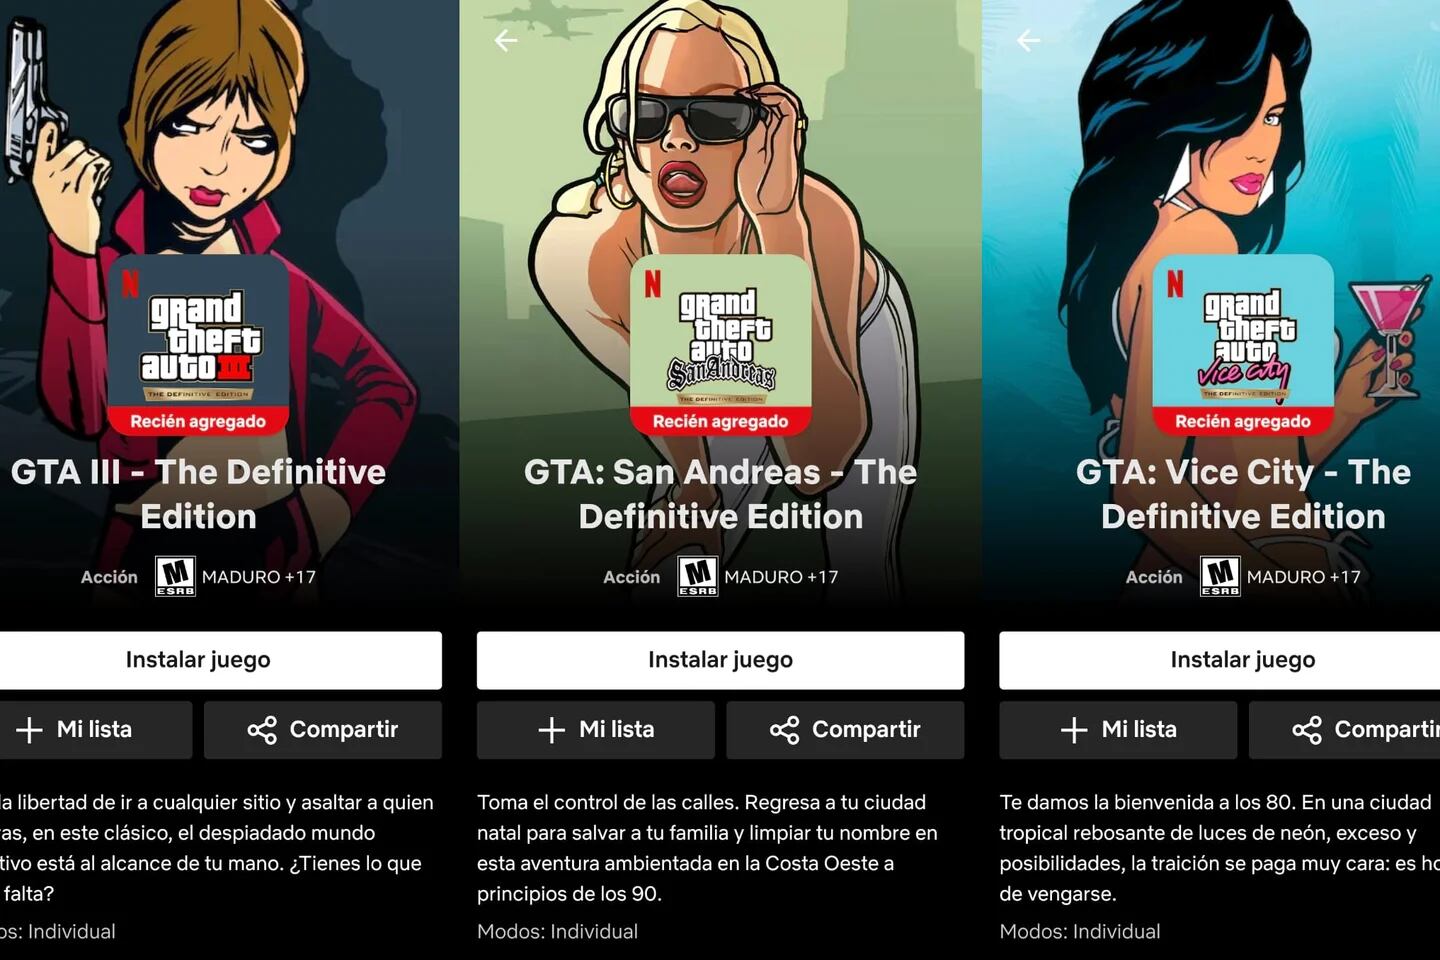 Grand Theft Auto, III, Vice City, and San Andreas on Netflix